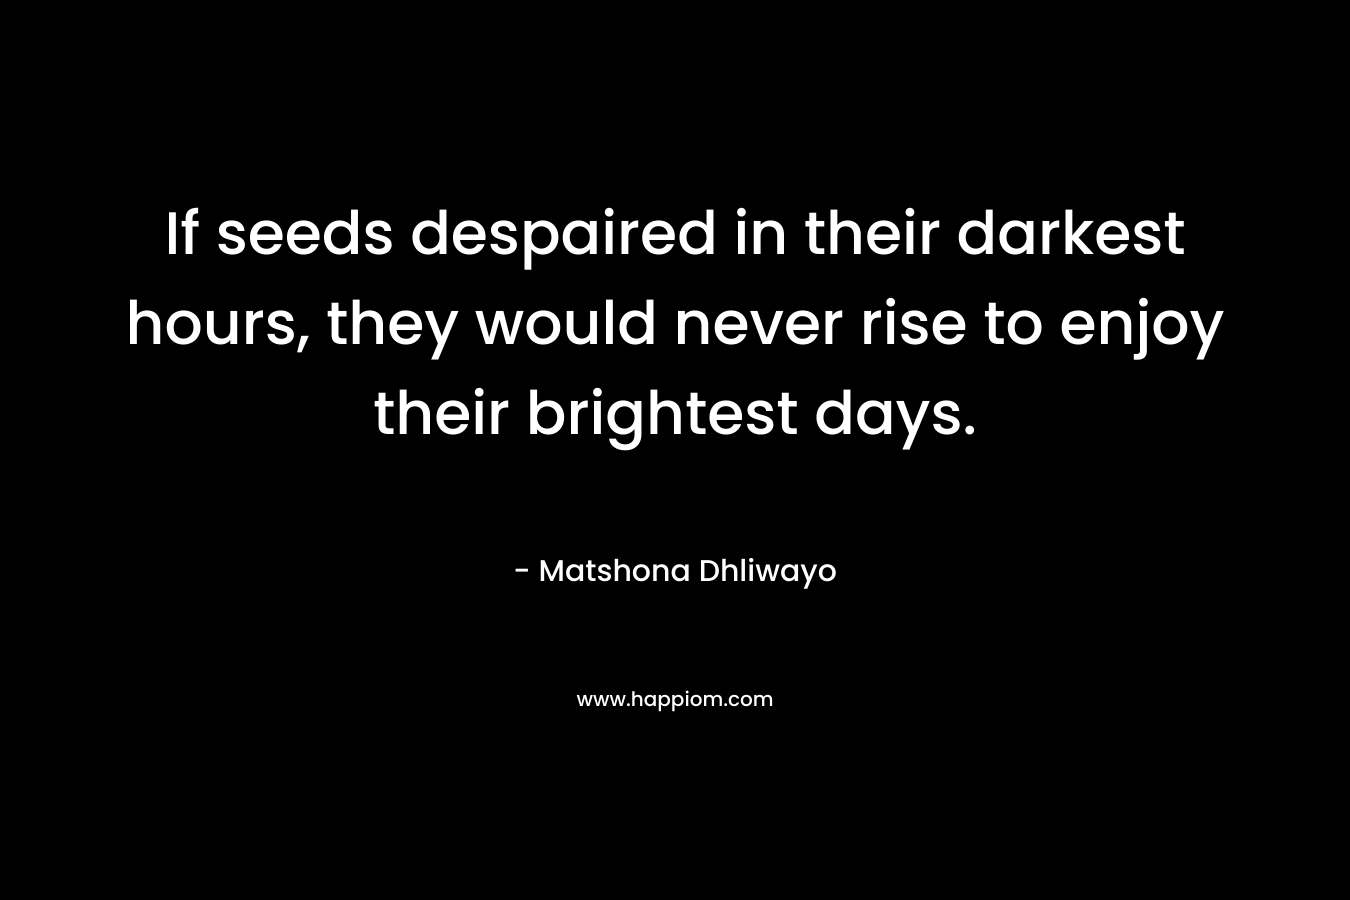 If seeds despaired in their darkest hours, they would never rise to enjoy their brightest days.